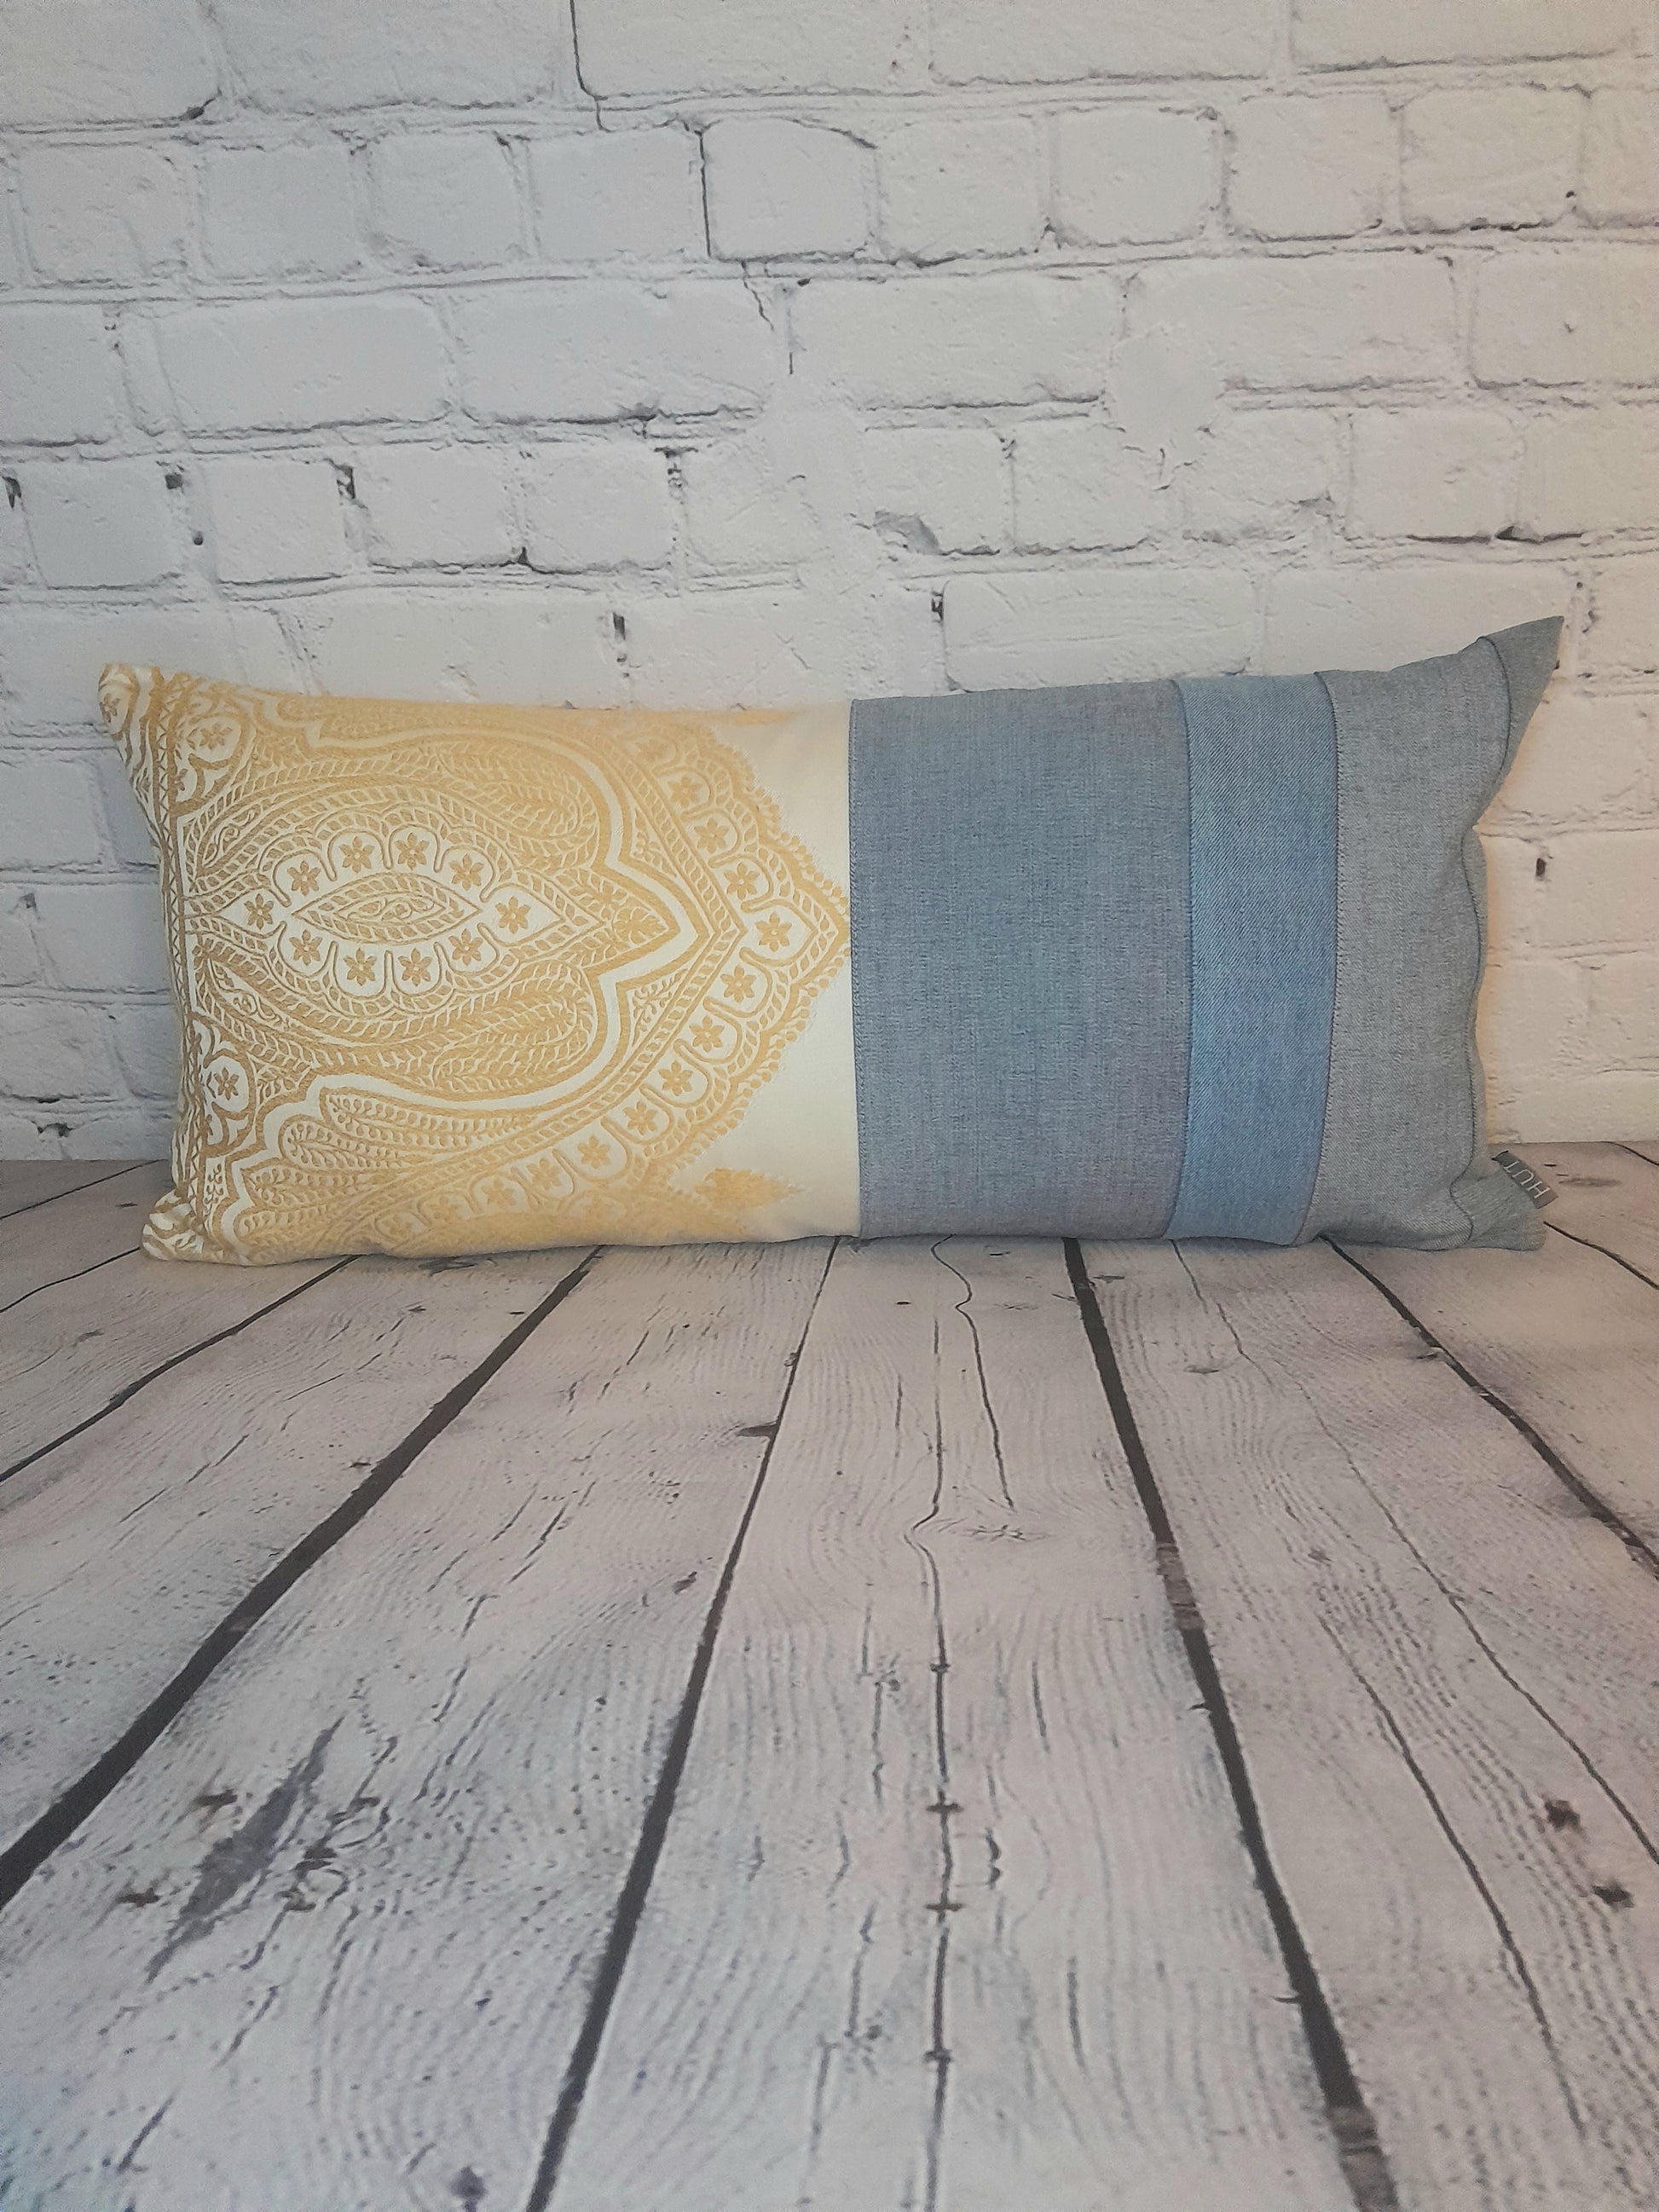 rectangle luxury denim bolster cushion cover throw pillow, unique eco interior decor, using vintage denim and dead stock designer furnishings fabric. Small soon to be before company.